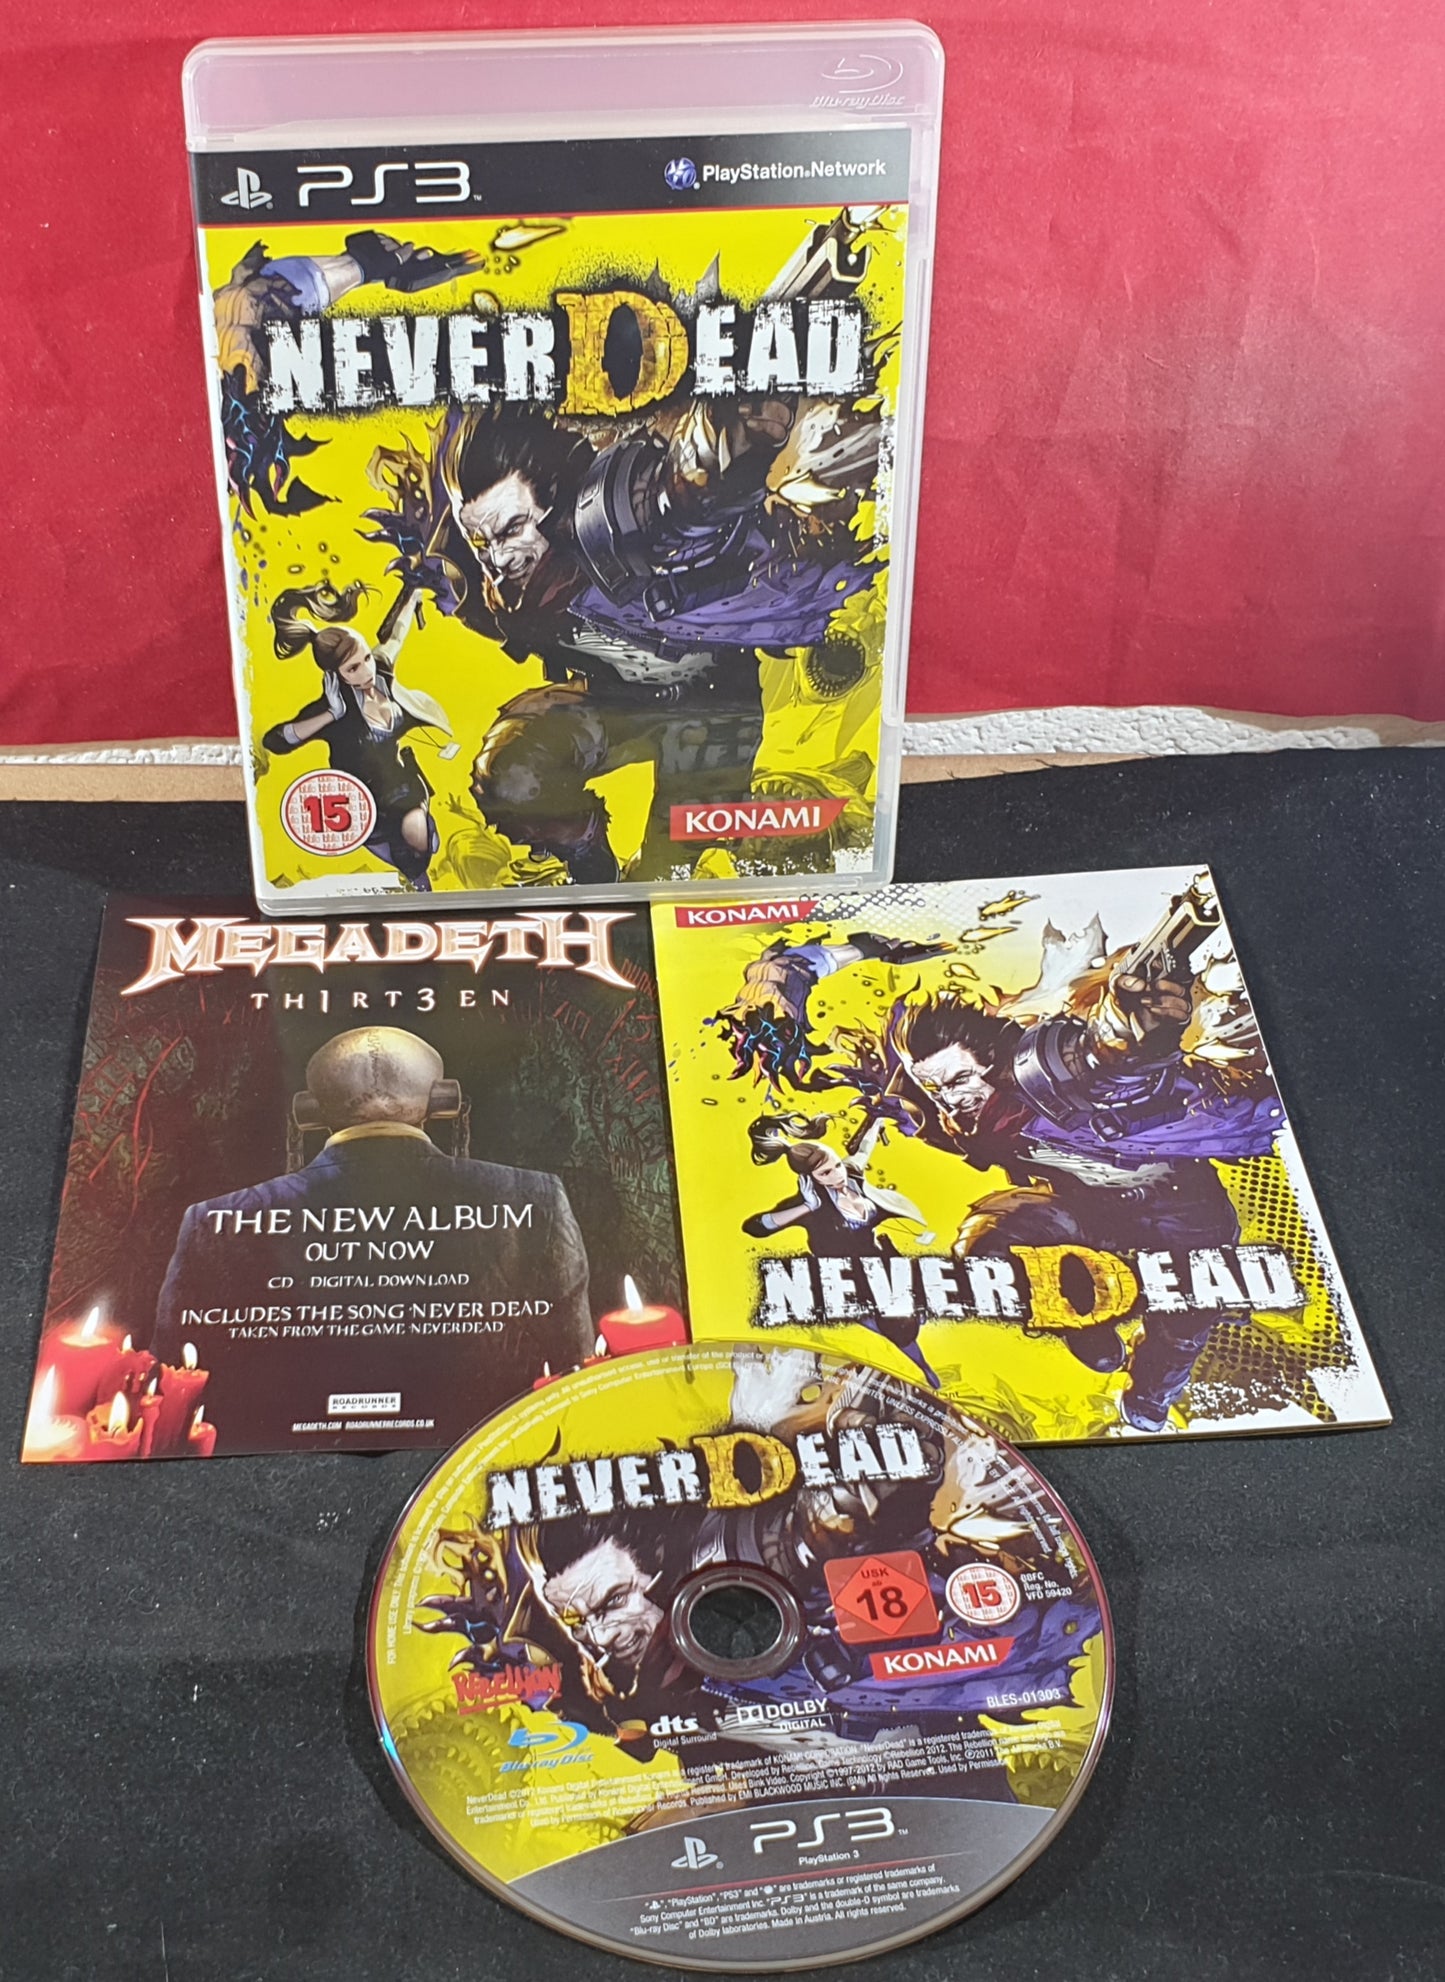 NeverDead Sony Playstation 3 (PS3) Game